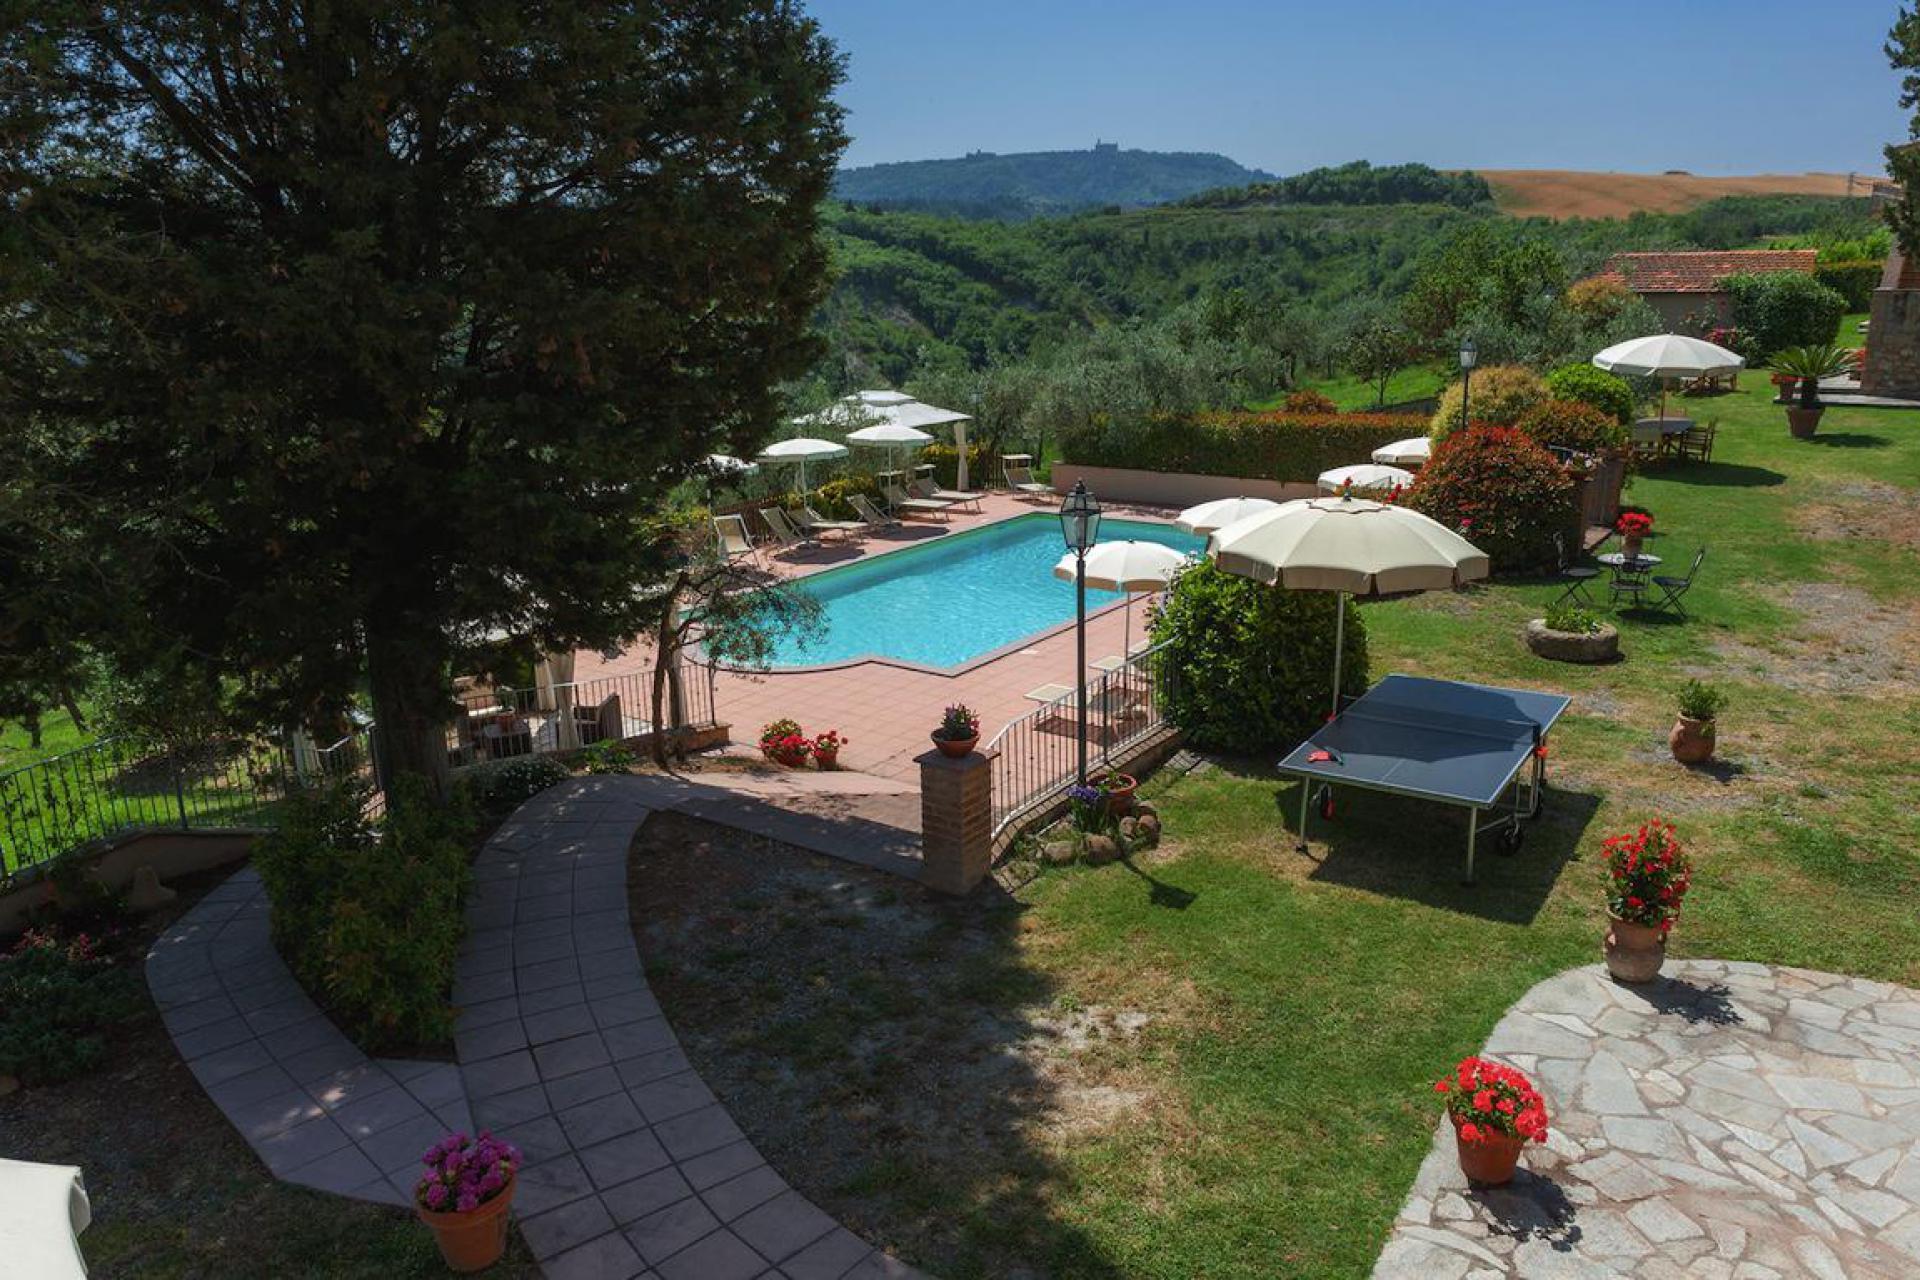 2. A real agriturismo in the heart of Tuscany